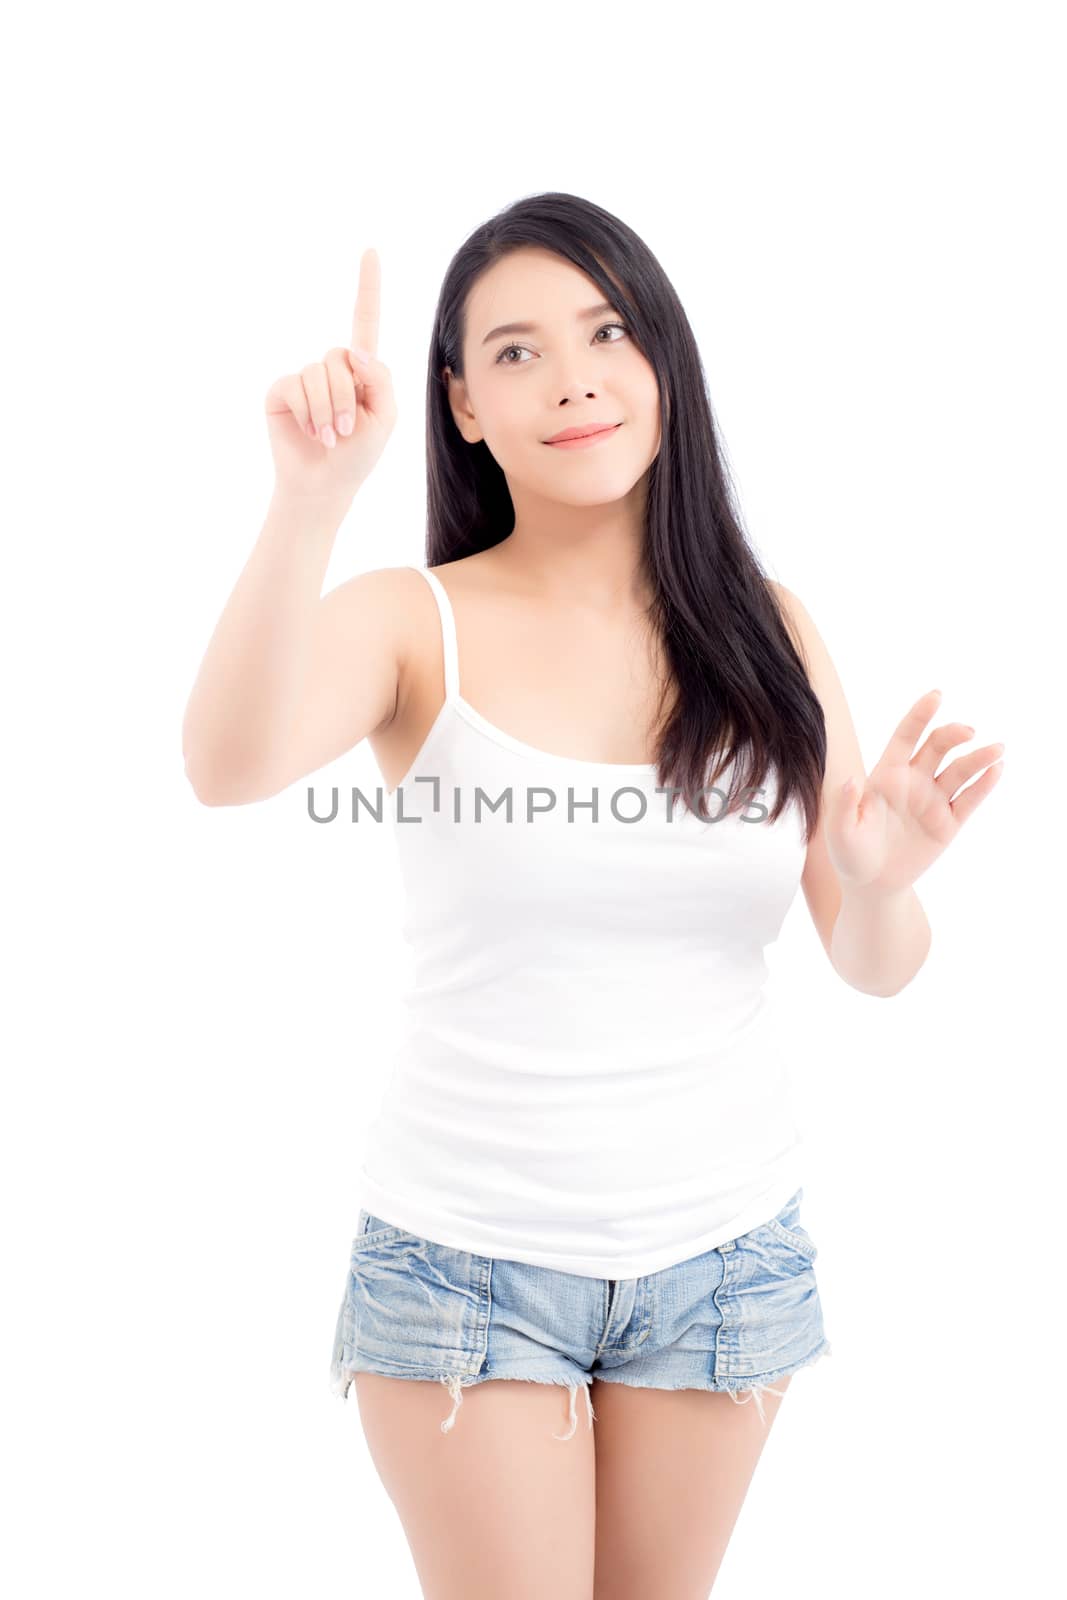 Portrait of beautiful young asian woman happiness standing finger pointing something isolated on white background, girl is a smile.